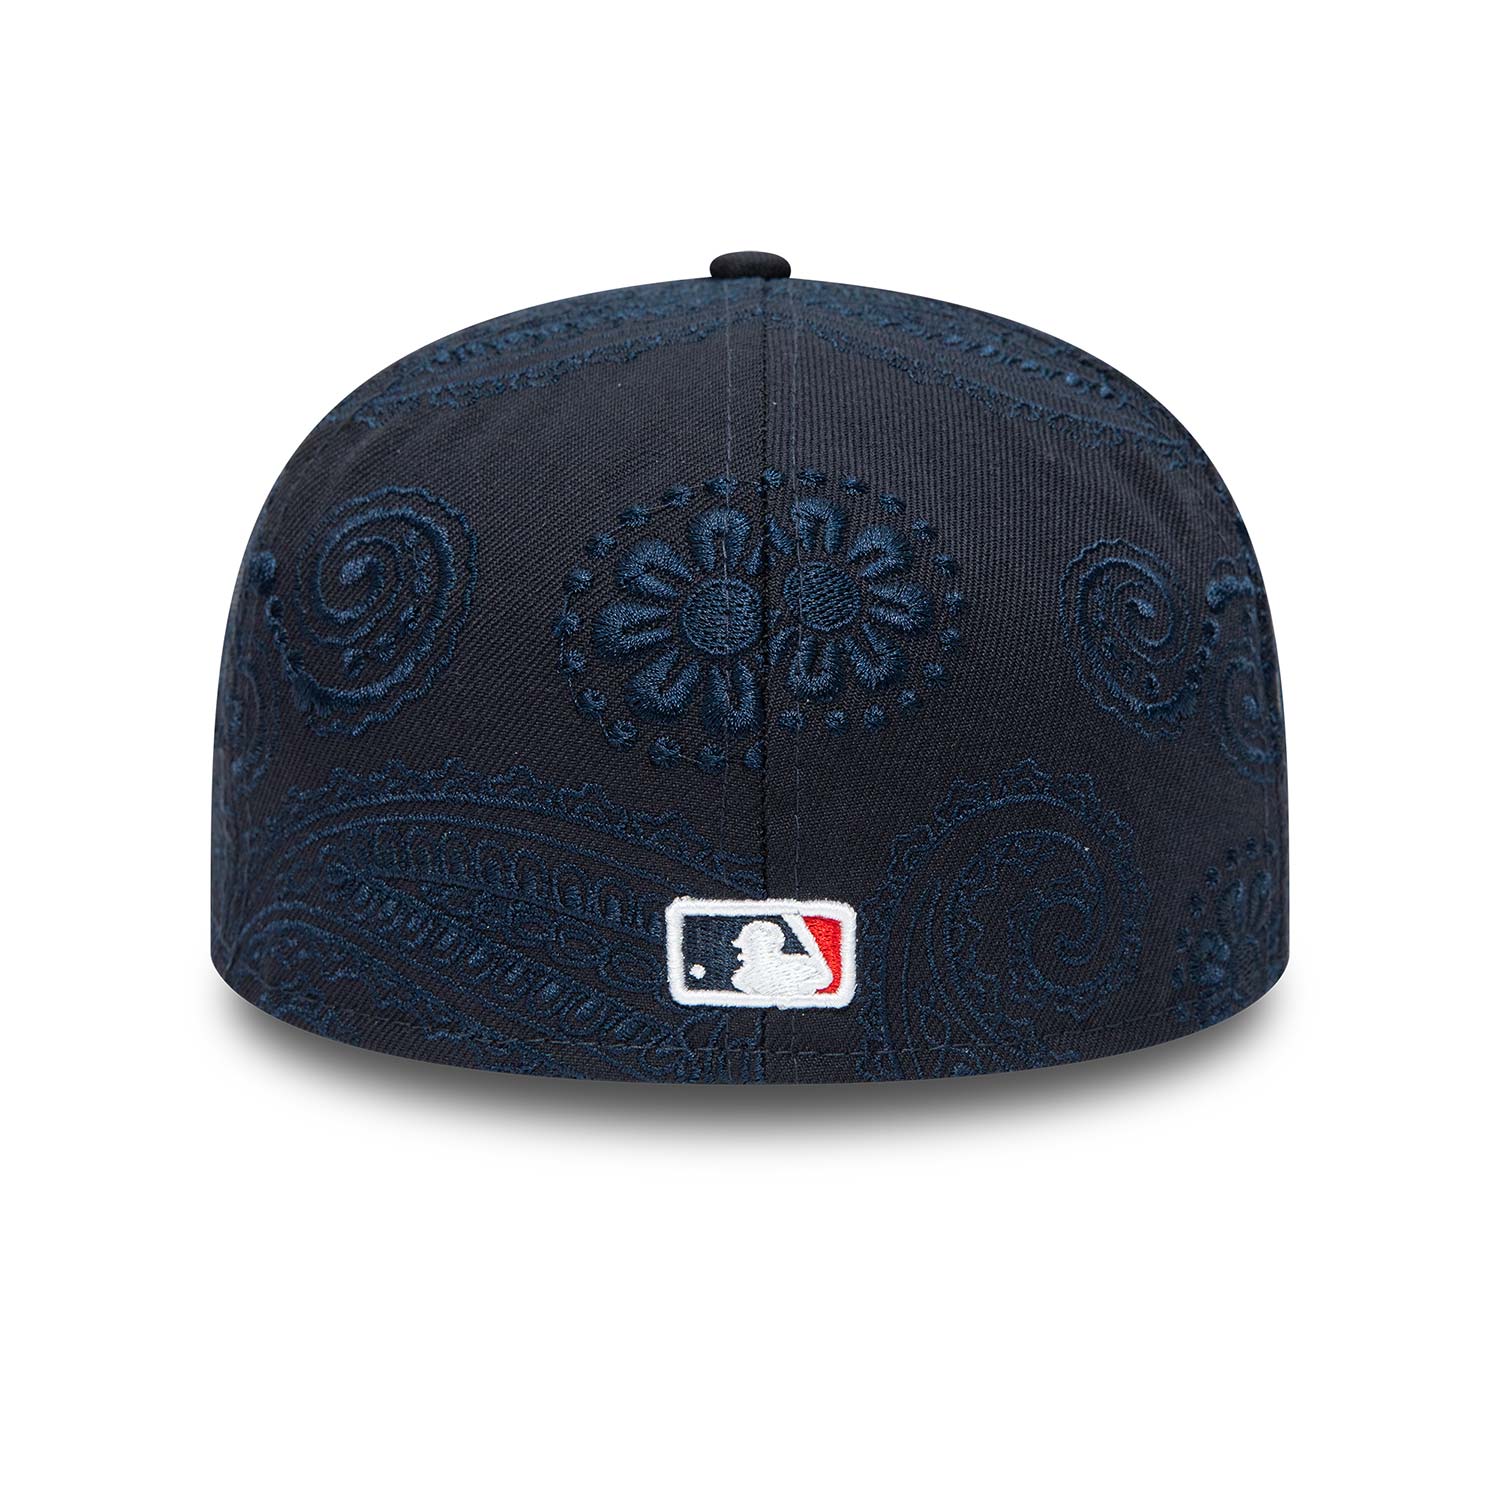 Cappellino 59FIFTY Fitted Atlanta Braves MLB Swirl Blu scuro 